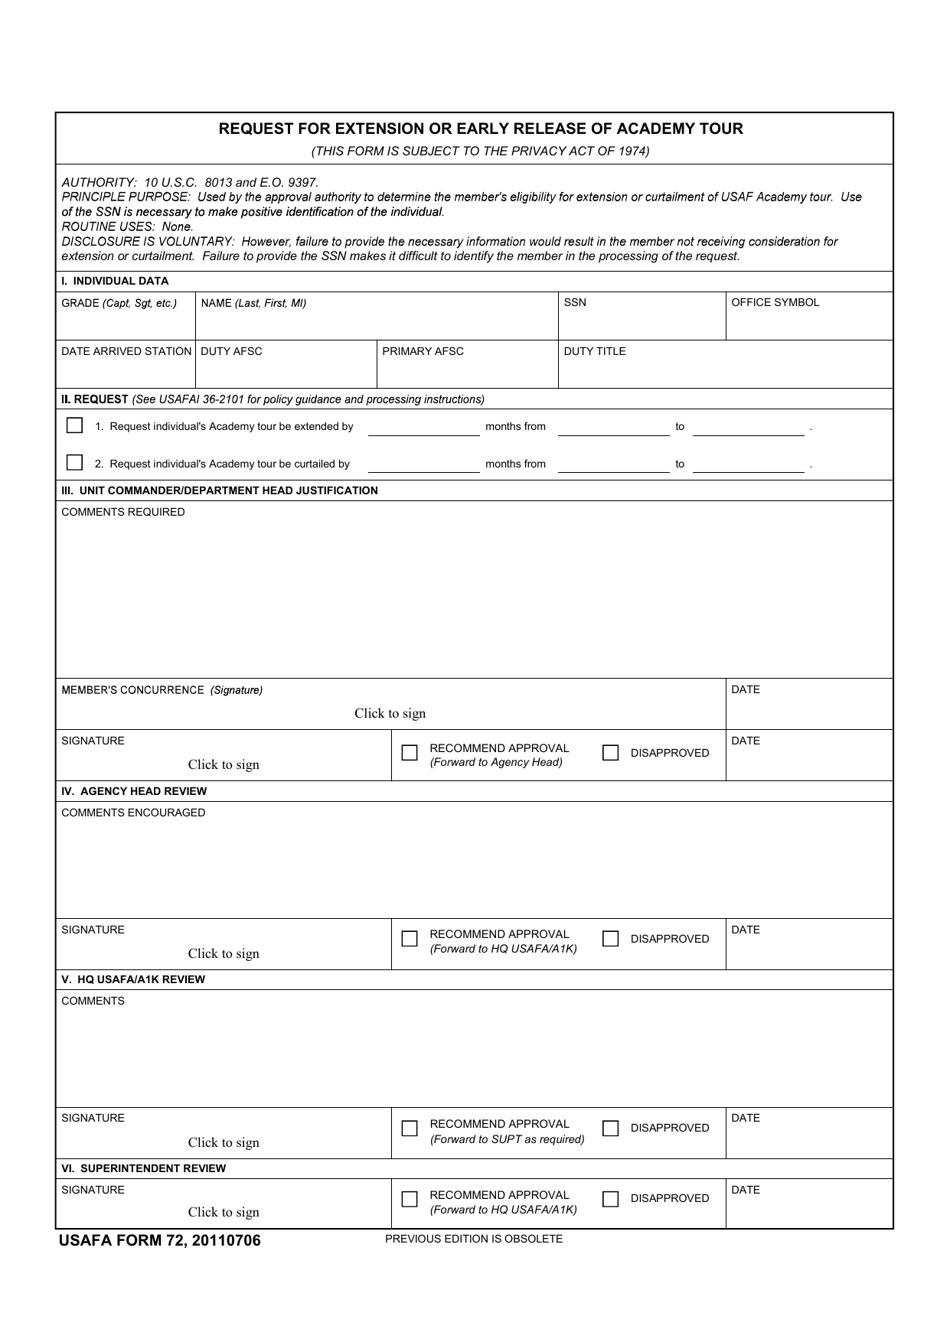 USAFA Form 72 Request for Extension or Early Release of Academy Tour, Page 1